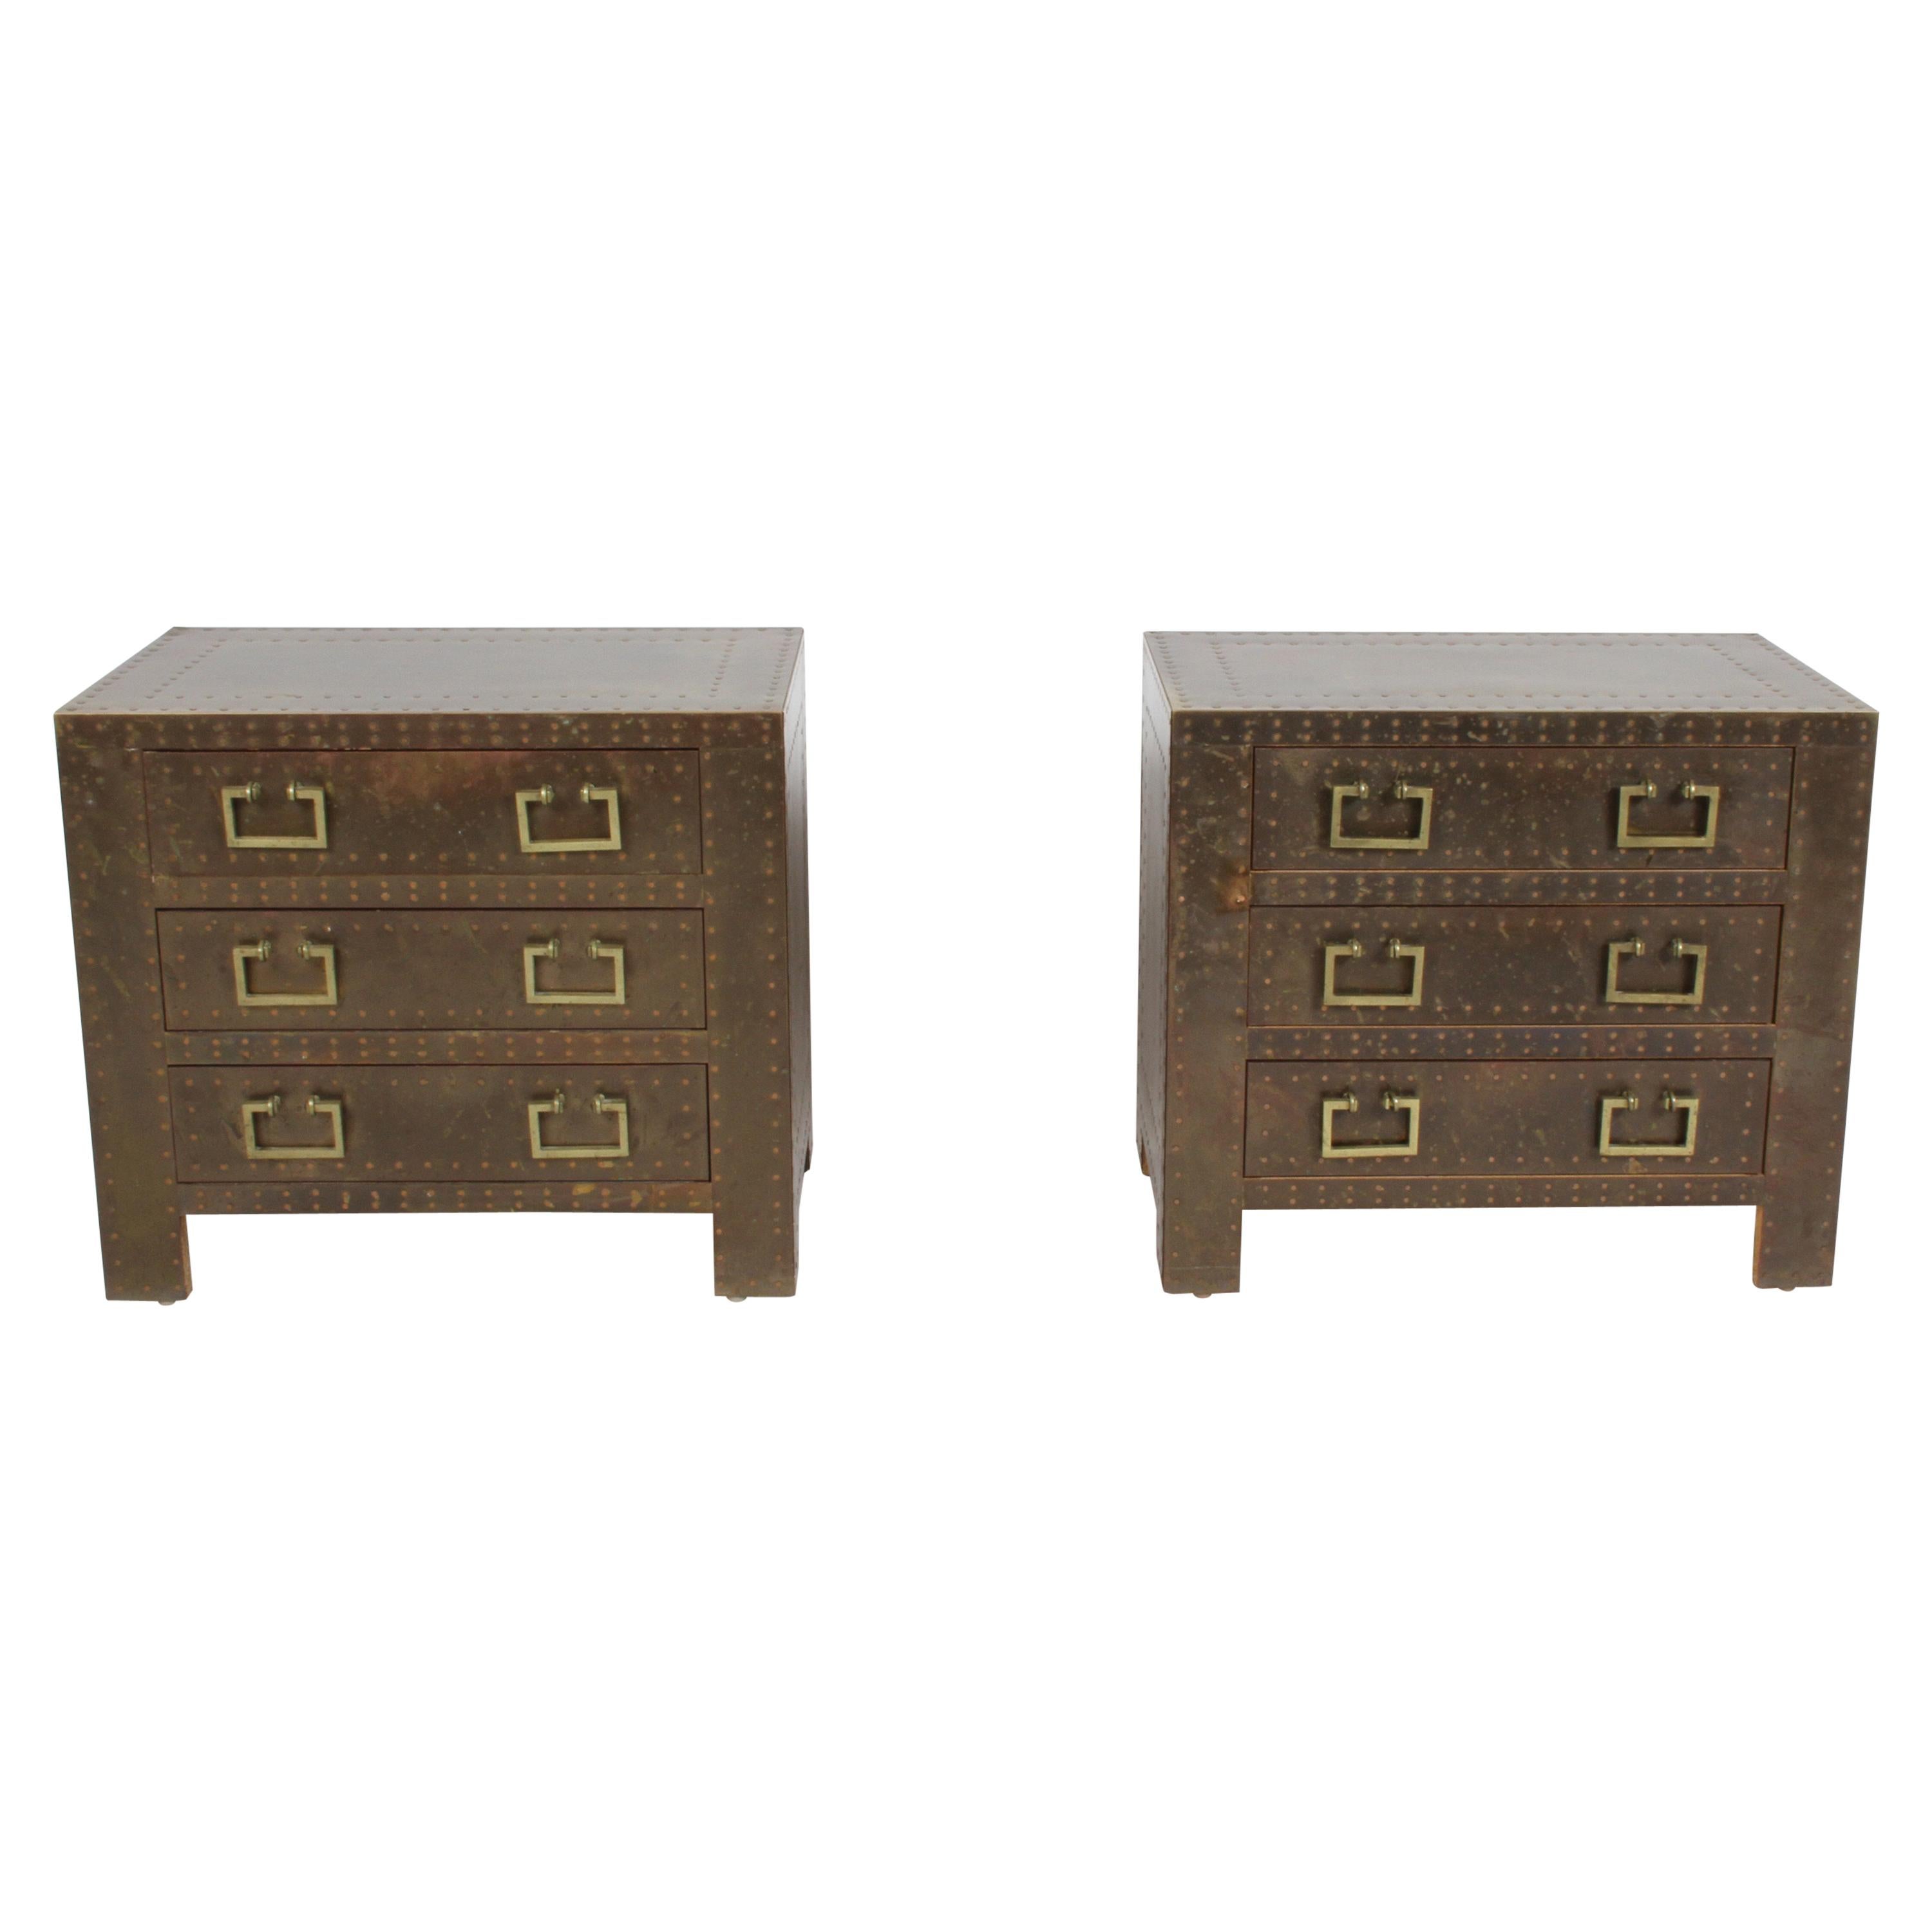 Pair of Sarreid Brass-Clad Chests Use as End Tables or Nightstands